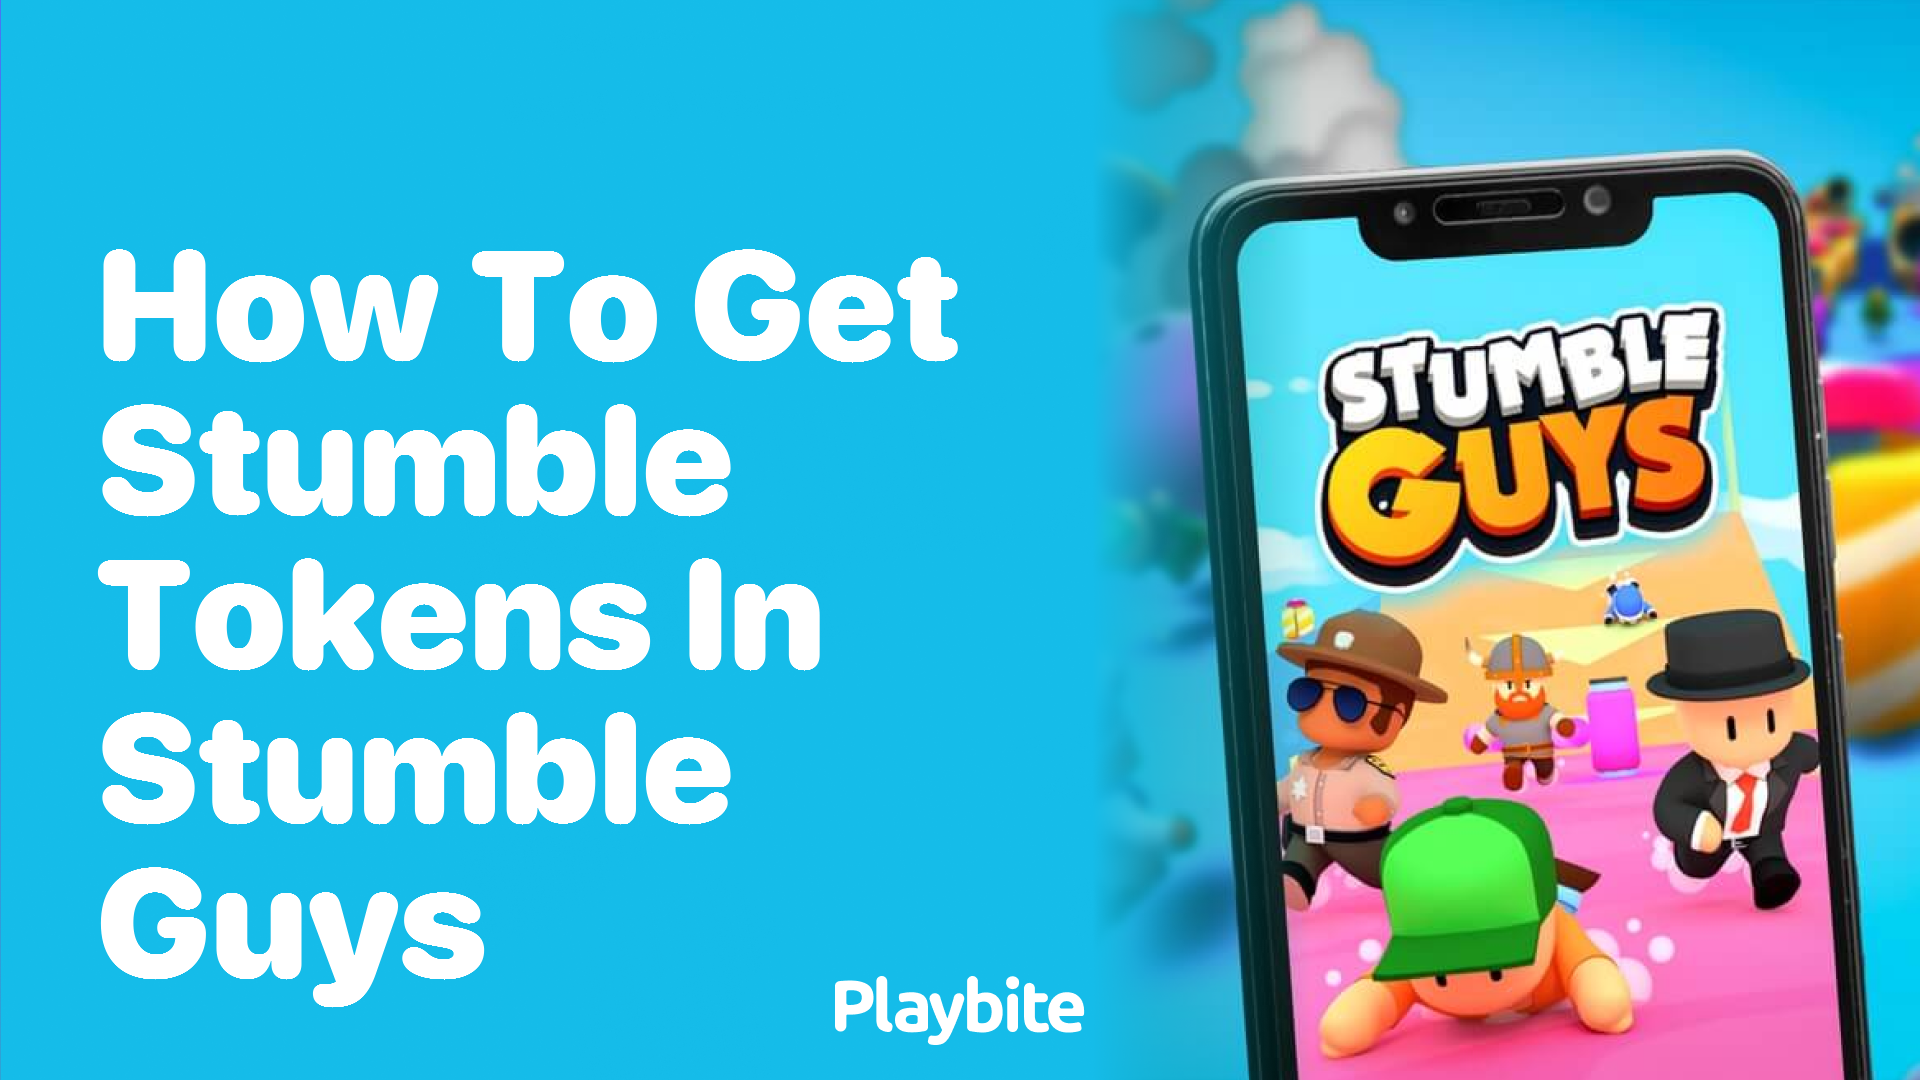 How to Get Stumble Tokens in Stumble Guys